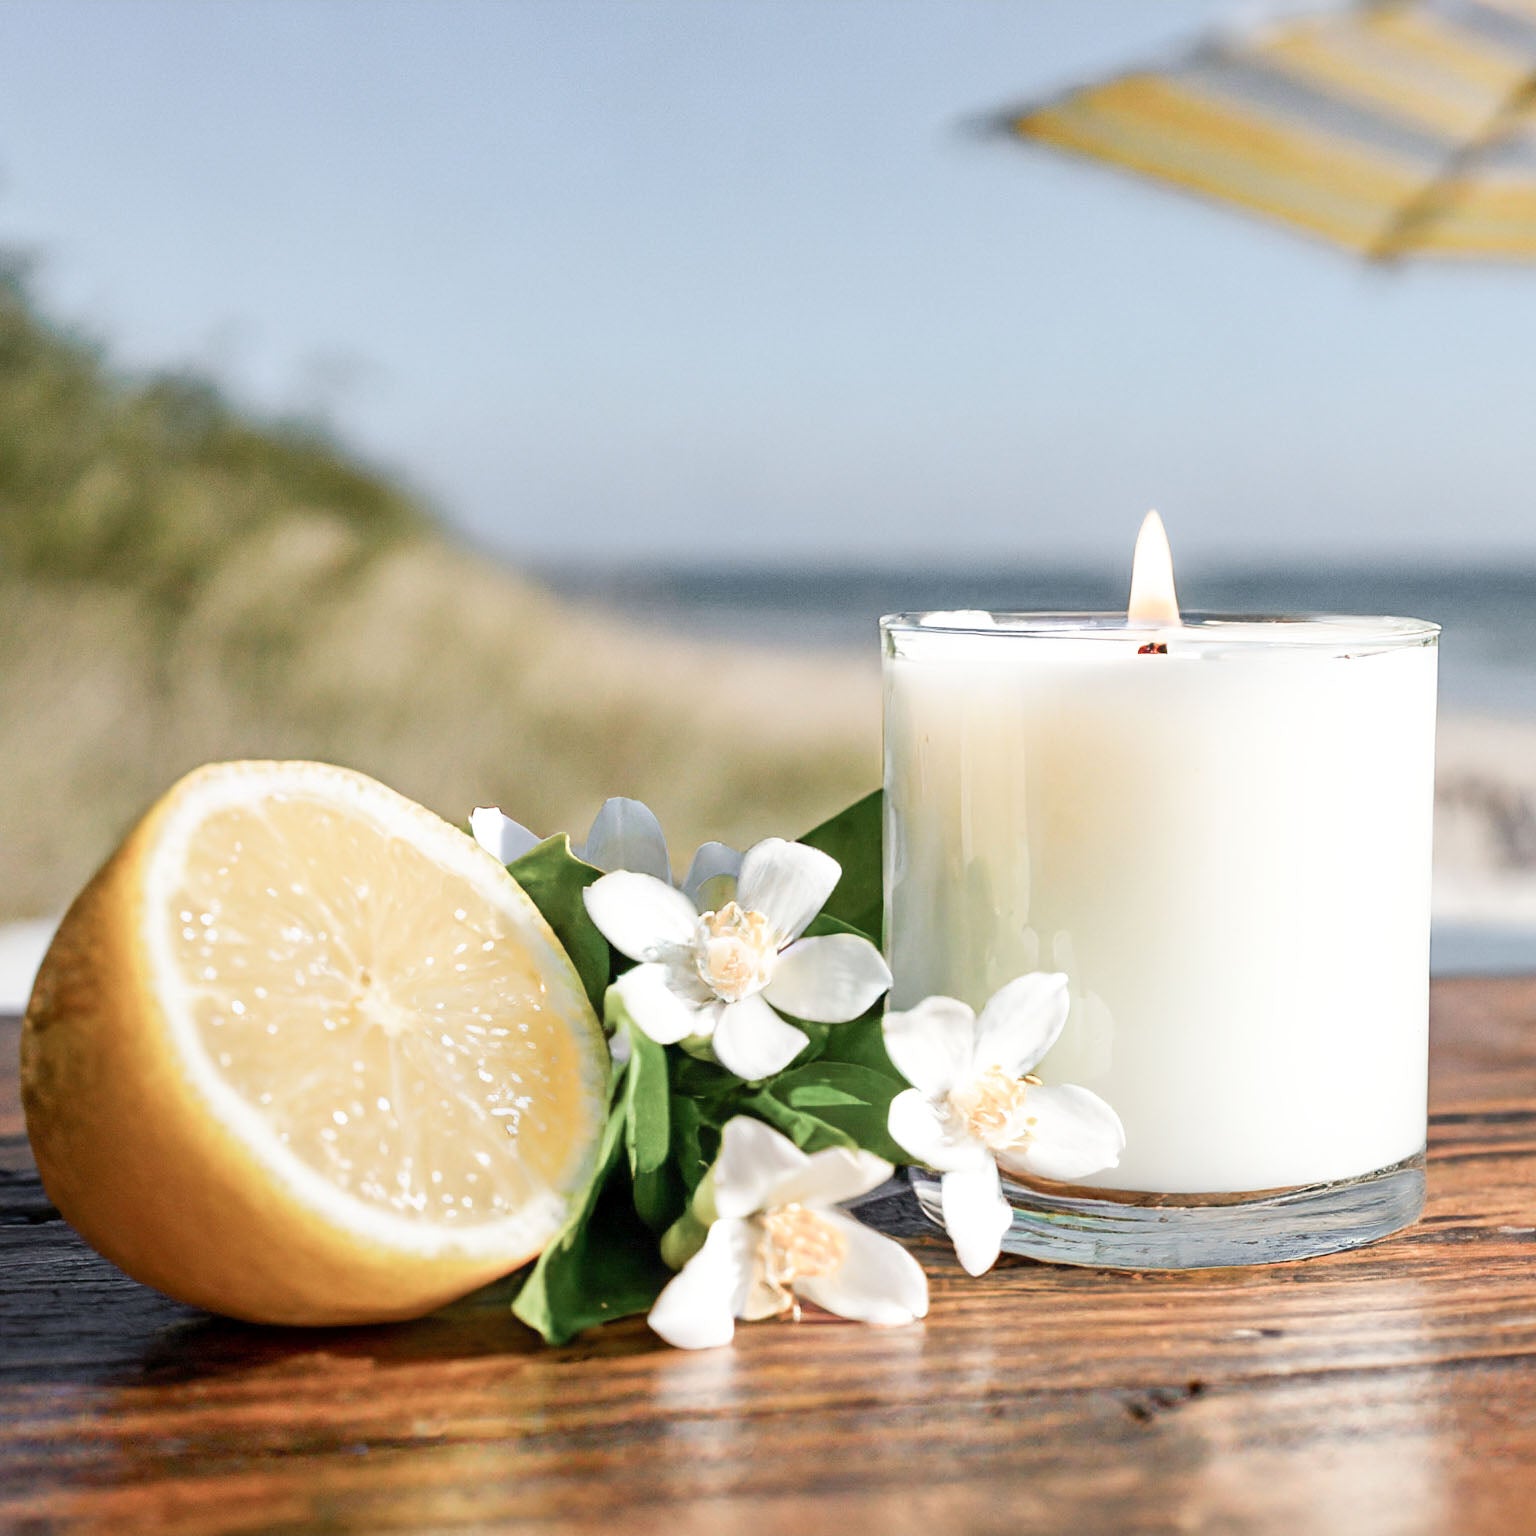 Scented soy candle on teak wood table with lemon and jasmine with sea oats, beach, and umbrella in background.